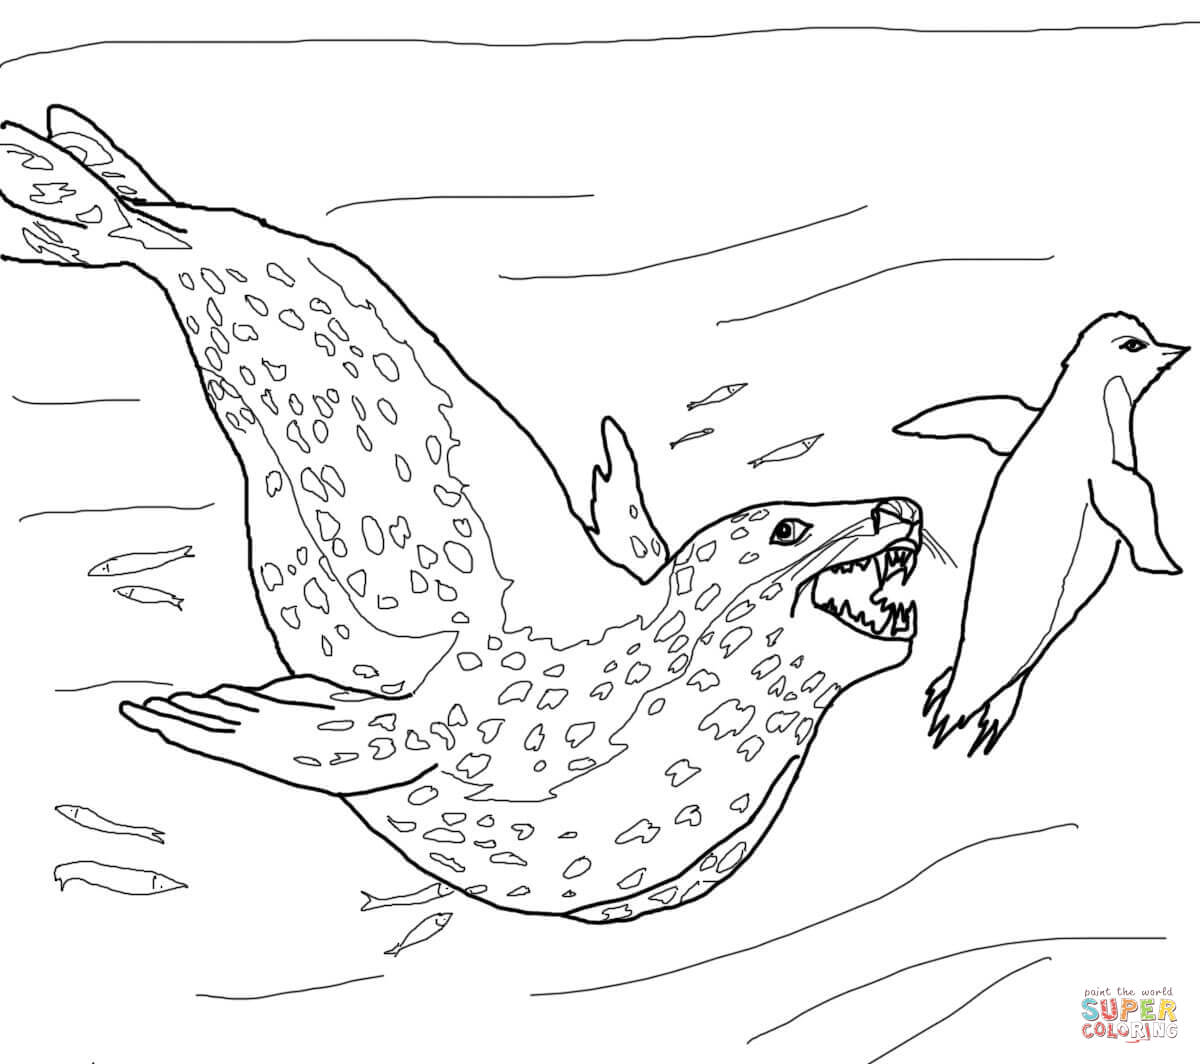 Leopard Seal coloring #20, Download drawings